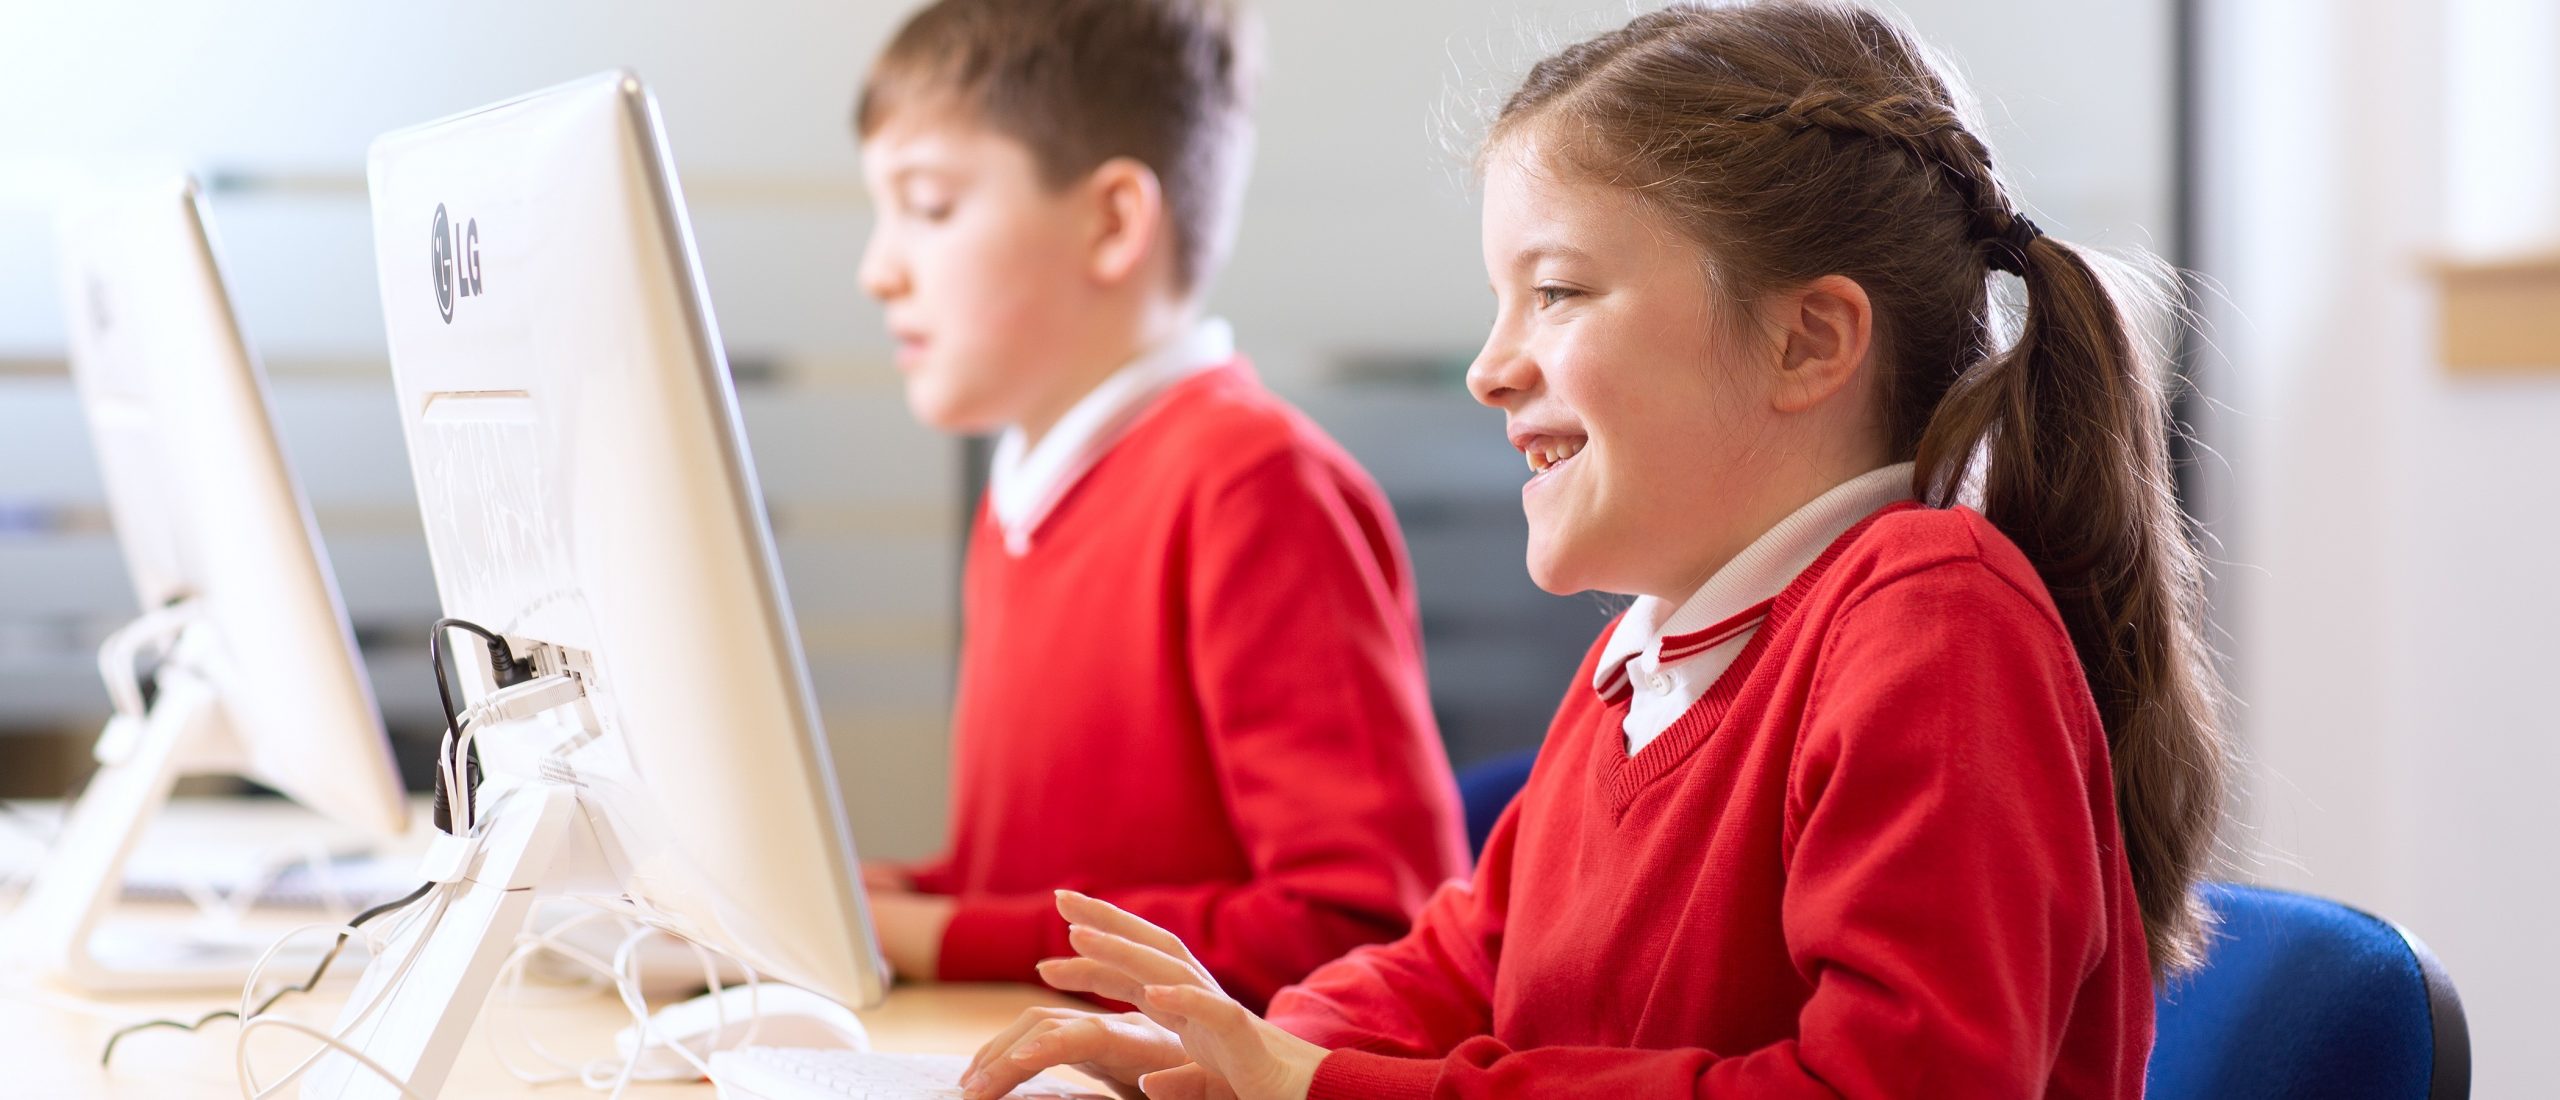 Primary school-age girl sat at a desktop computer, smiling while using Lexia literacy software for schools. A boy of the same age is sat at a computer in the background also using the software.